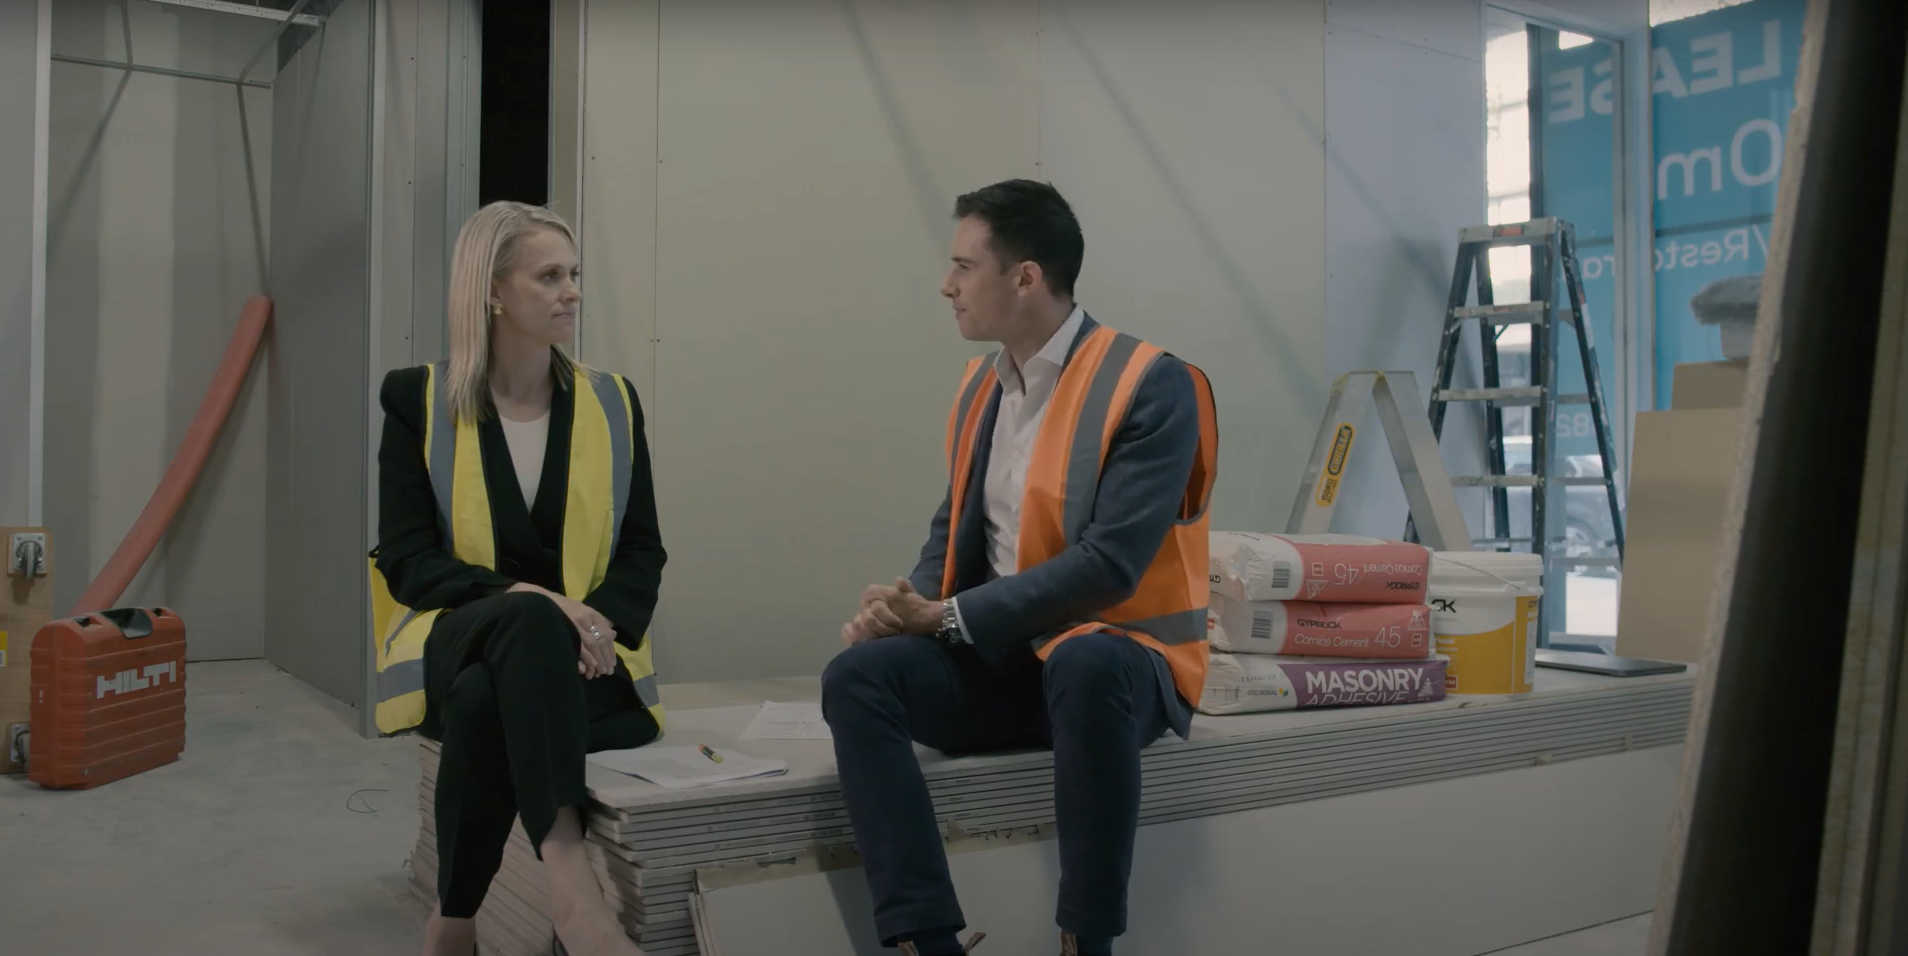 Dr Bronwyn King and Julian Muldoon, expert medical property consultant, sitting in a building undergoing a fit-out wearing high visibility vests.